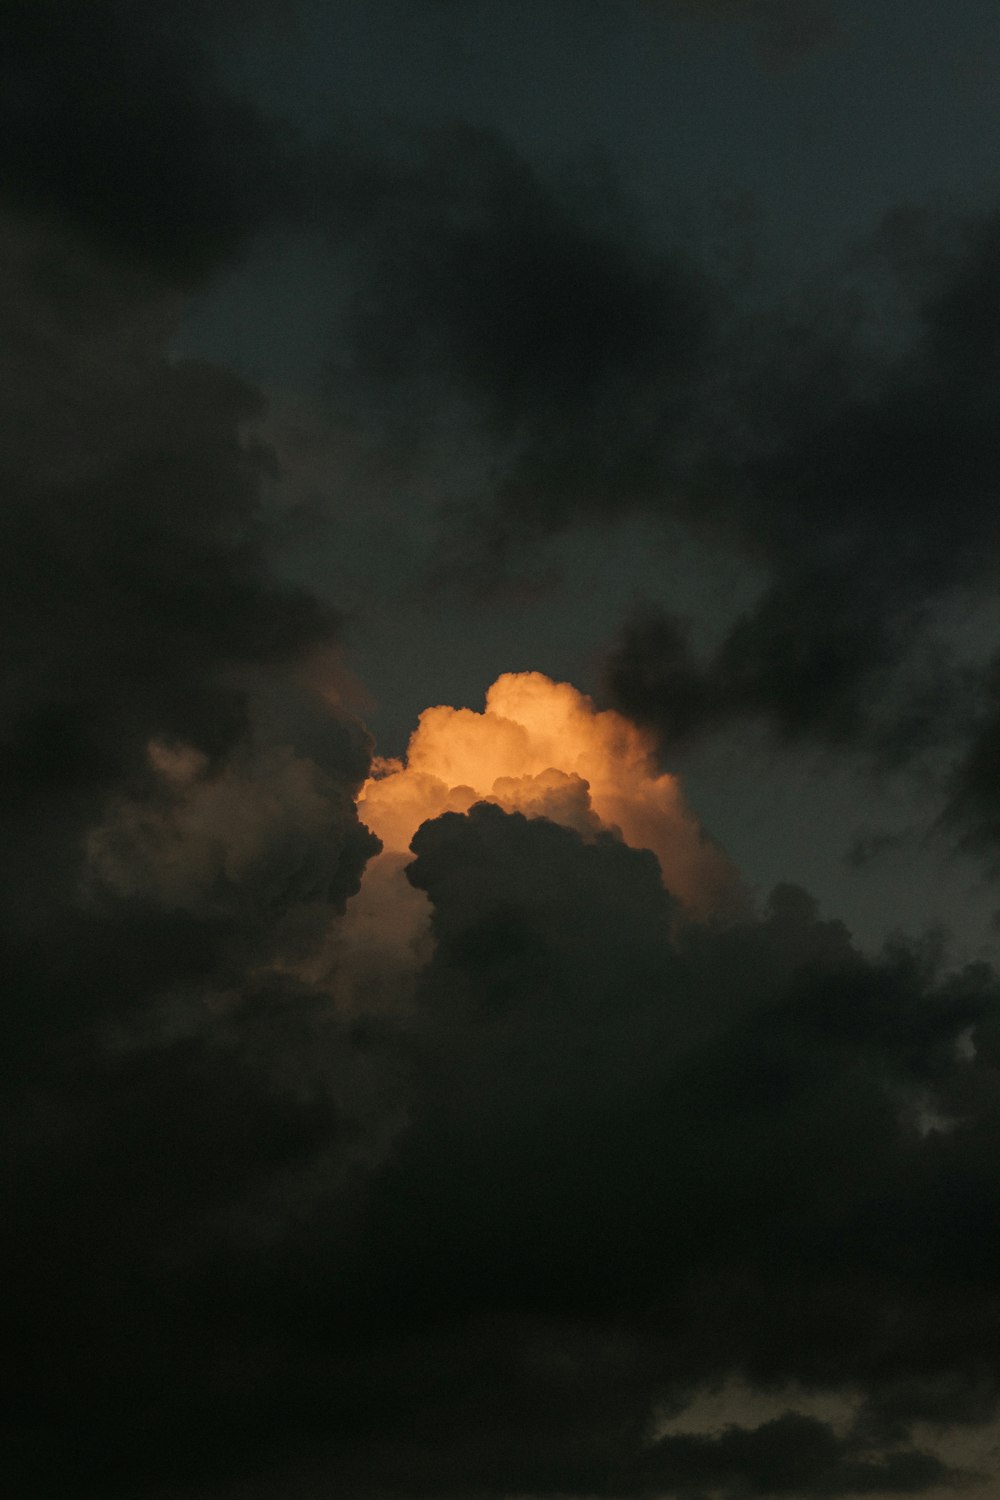 a large cloud in the sky with a yellow light